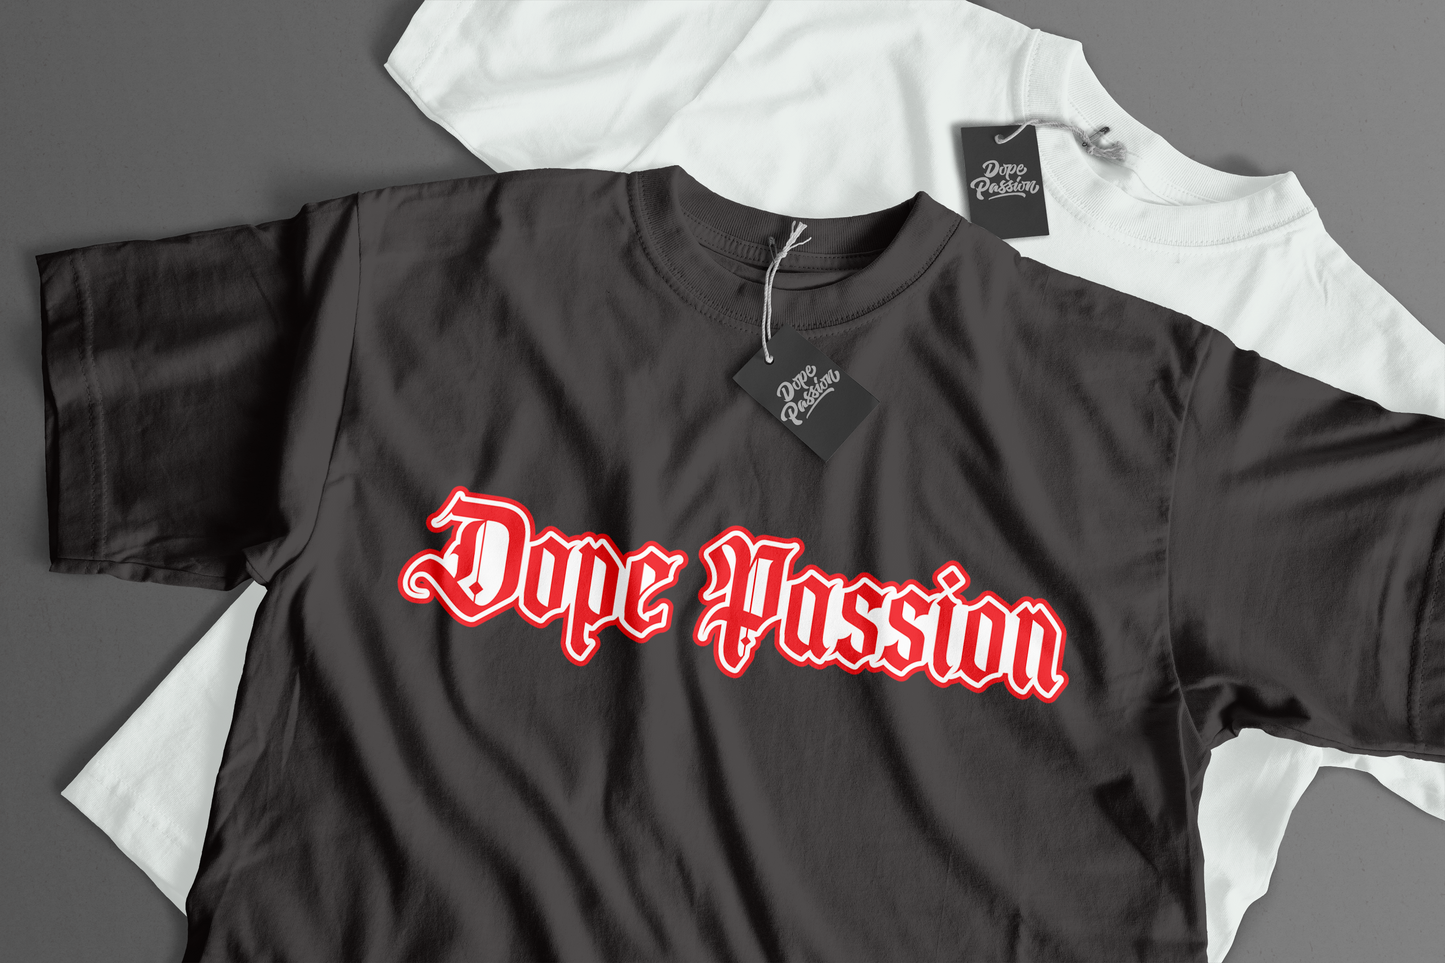 DOPE PASSION | OLD ENGLISH | RED | T-SHIRT